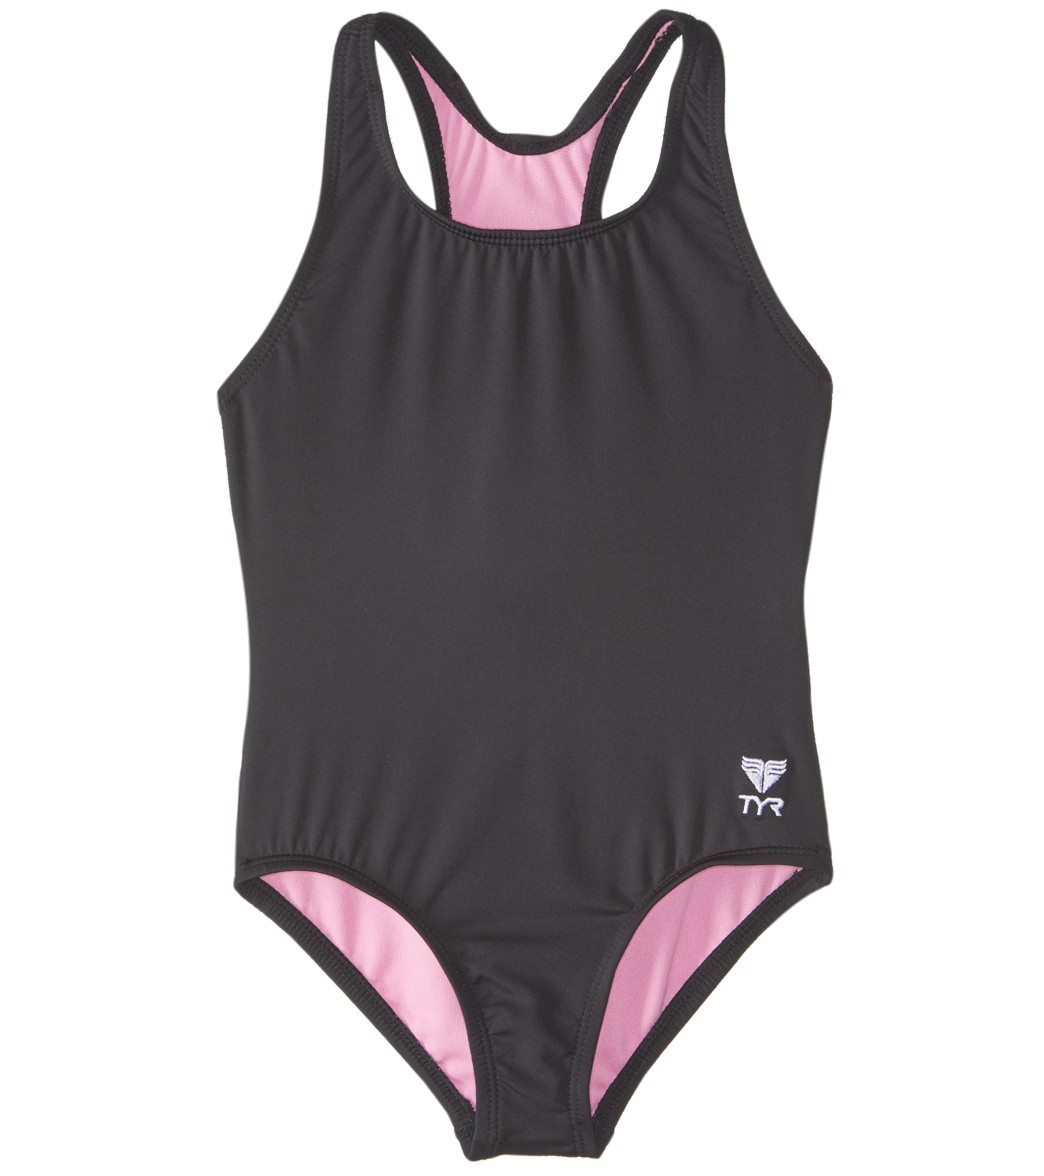 TYR Girls' Solid Ella Maxfit One Piece Swimsuit Toddler/Little/Big Kid - Black X-Small 4/5 Polyester/Spandex - Swimoutlet.com